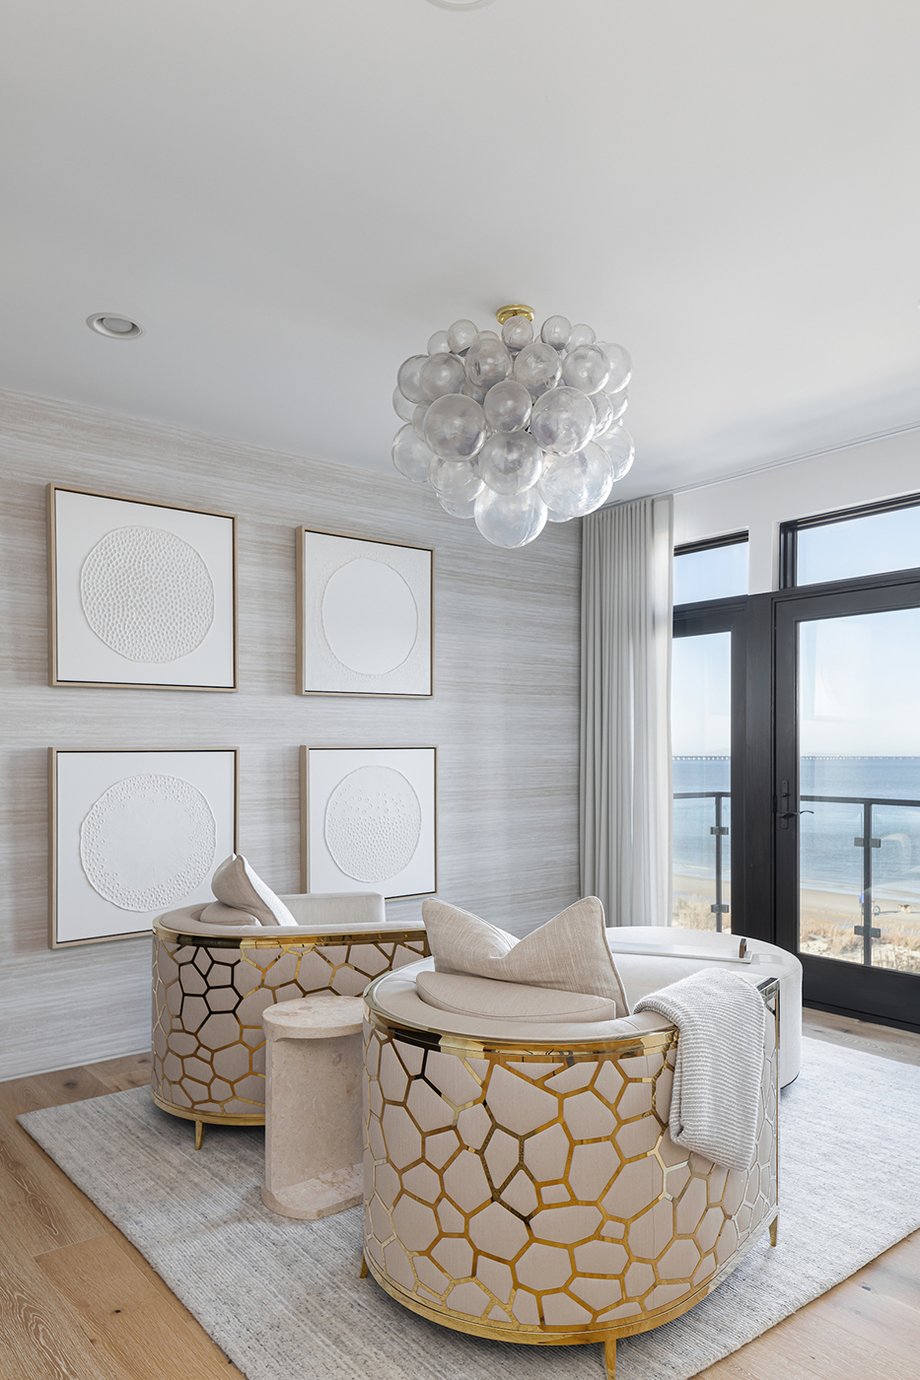 Bedroom chairs facing oceanside view in Virginia Beach home designed by Kenneth Byrd shot by Quentin Penn Hollar for Virginia Living Magazine